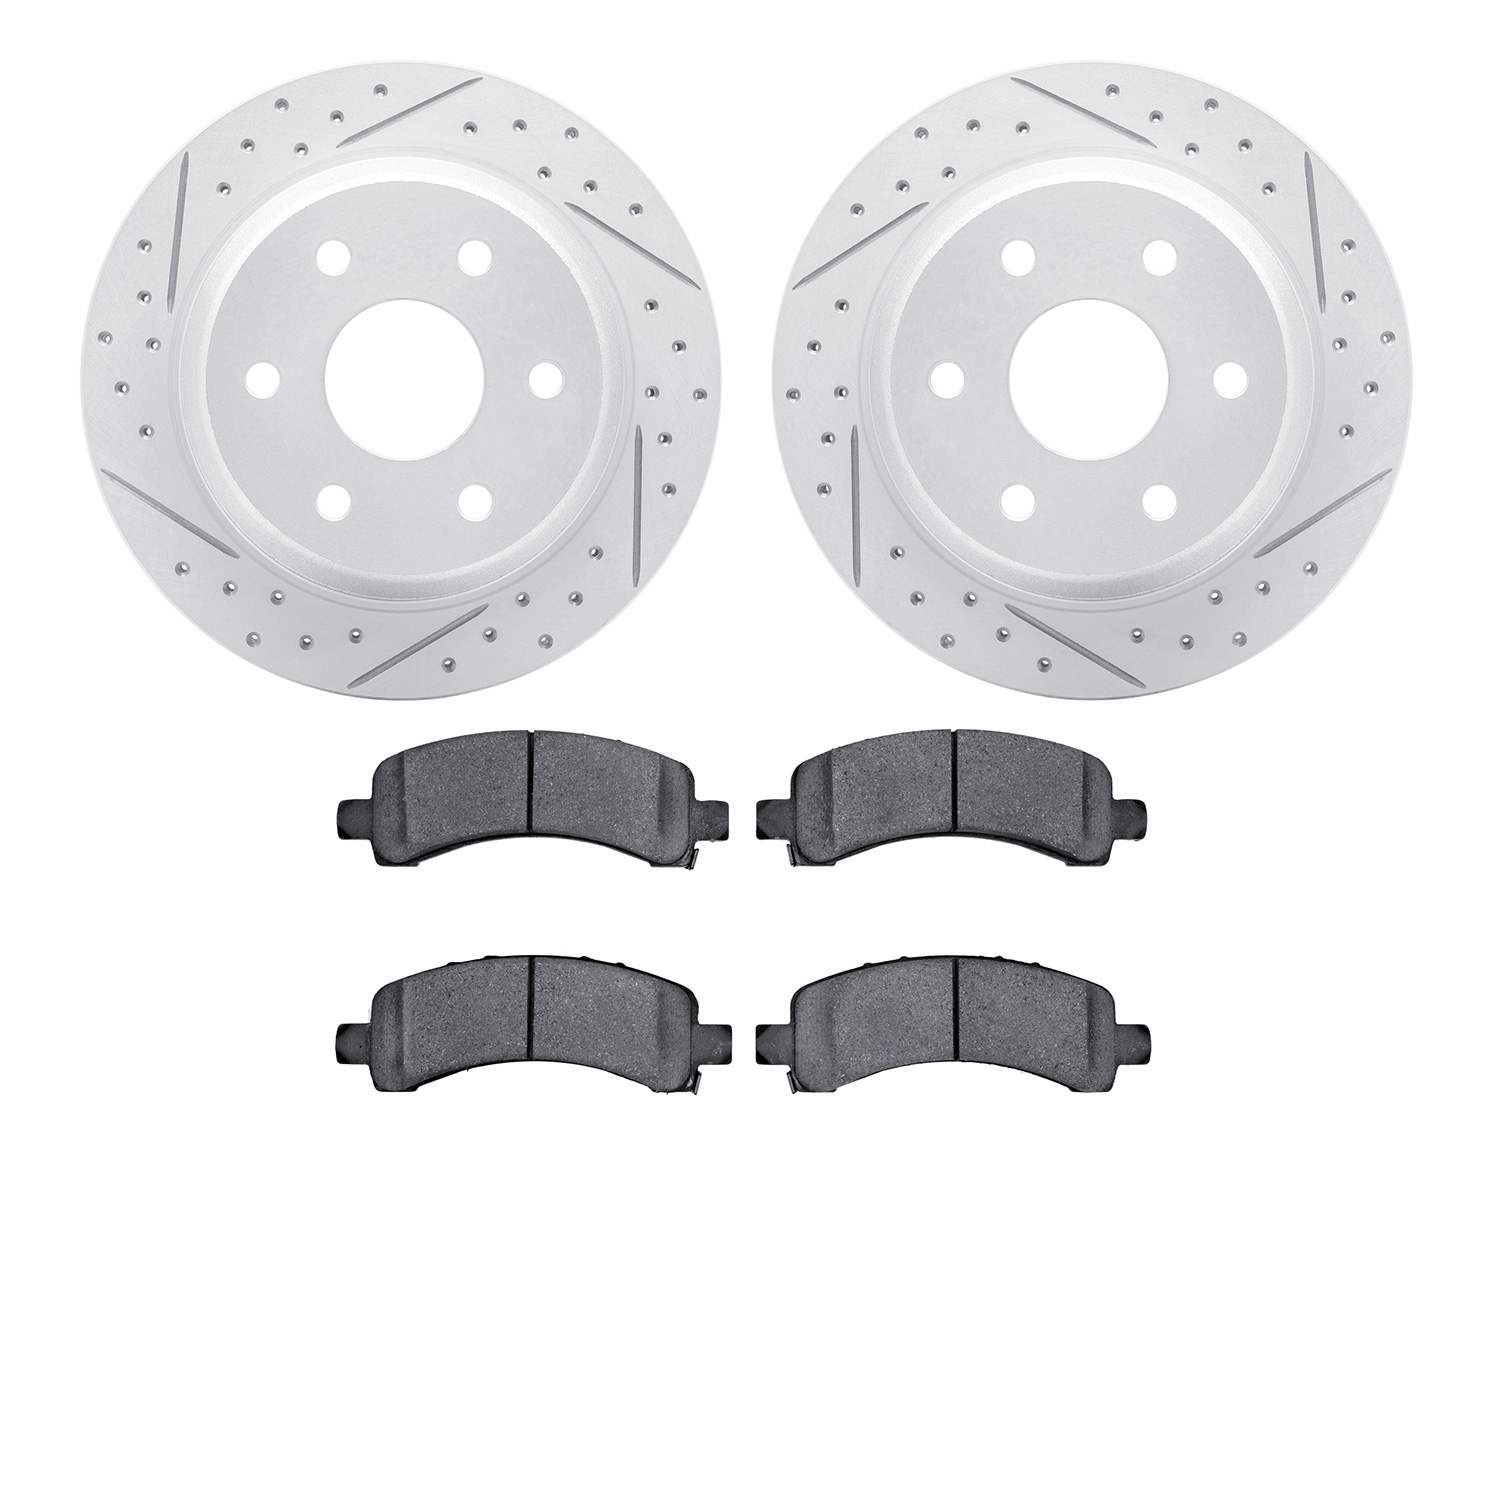 2202-48028 Geoperformance Drilled/Slotted Rotors w/Heavy-Duty Pads Kit, 2002-2014 GM, Position: Rear